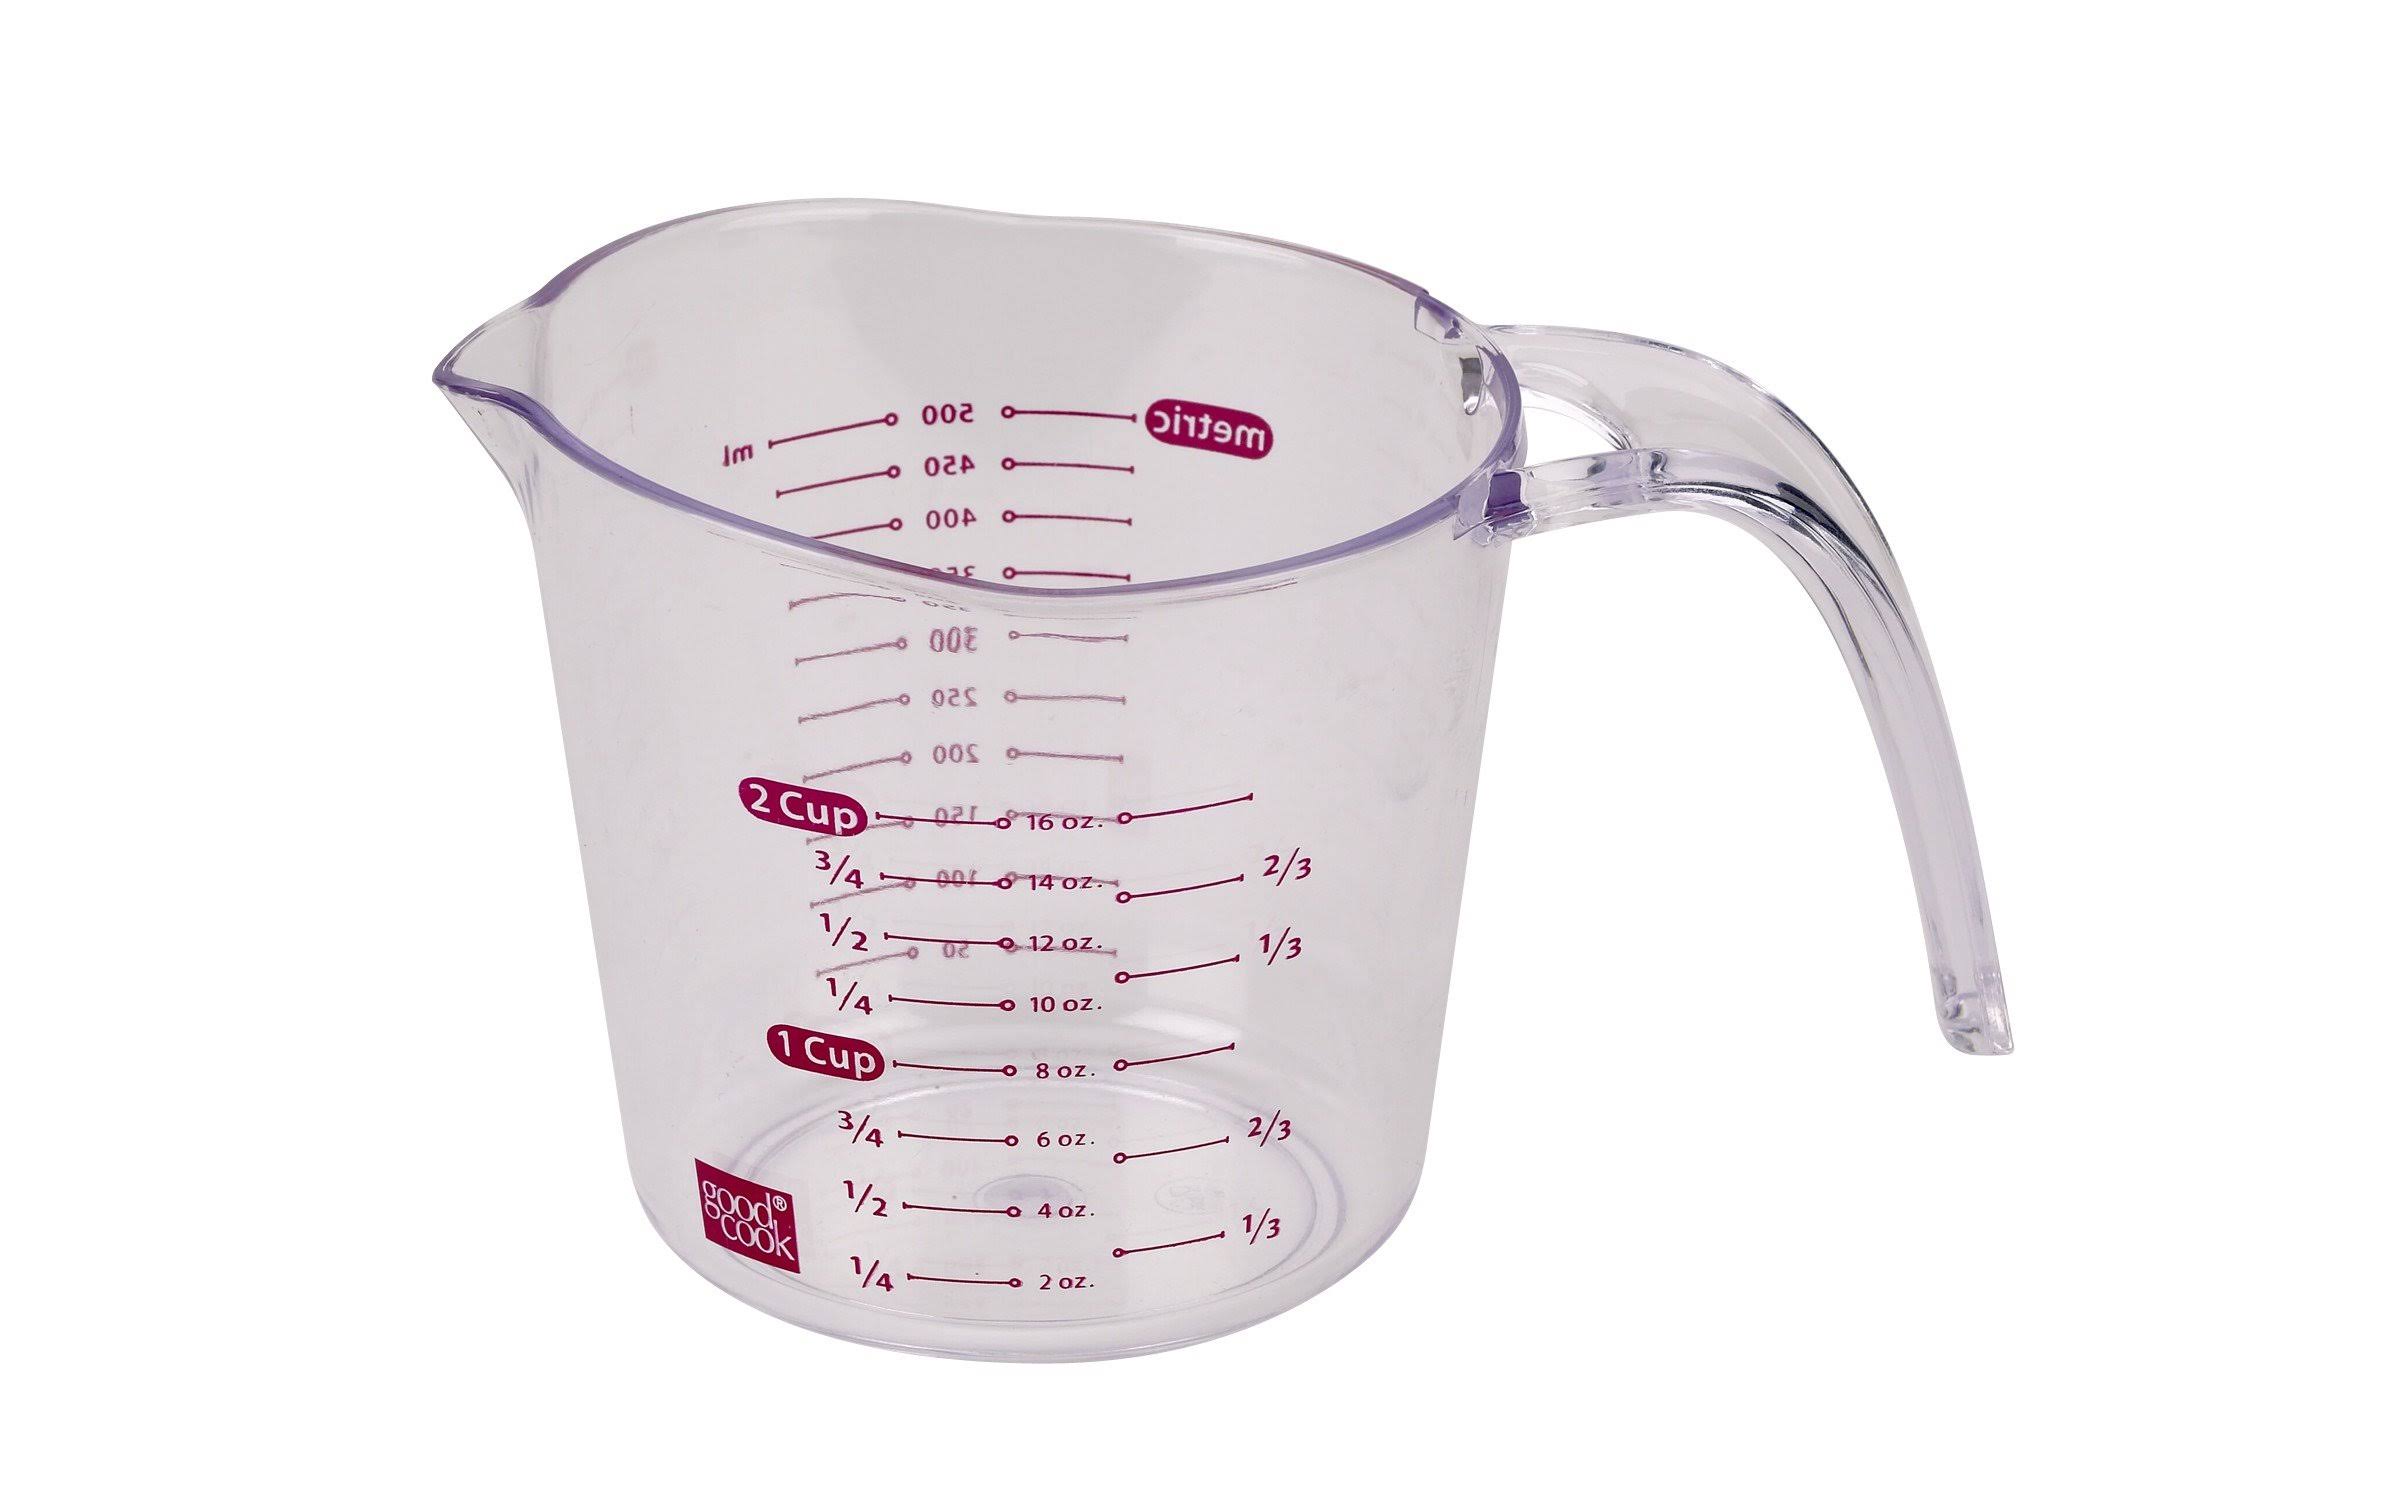 Good Cook Clear Measuring Cup with Measurements - 2 Cup